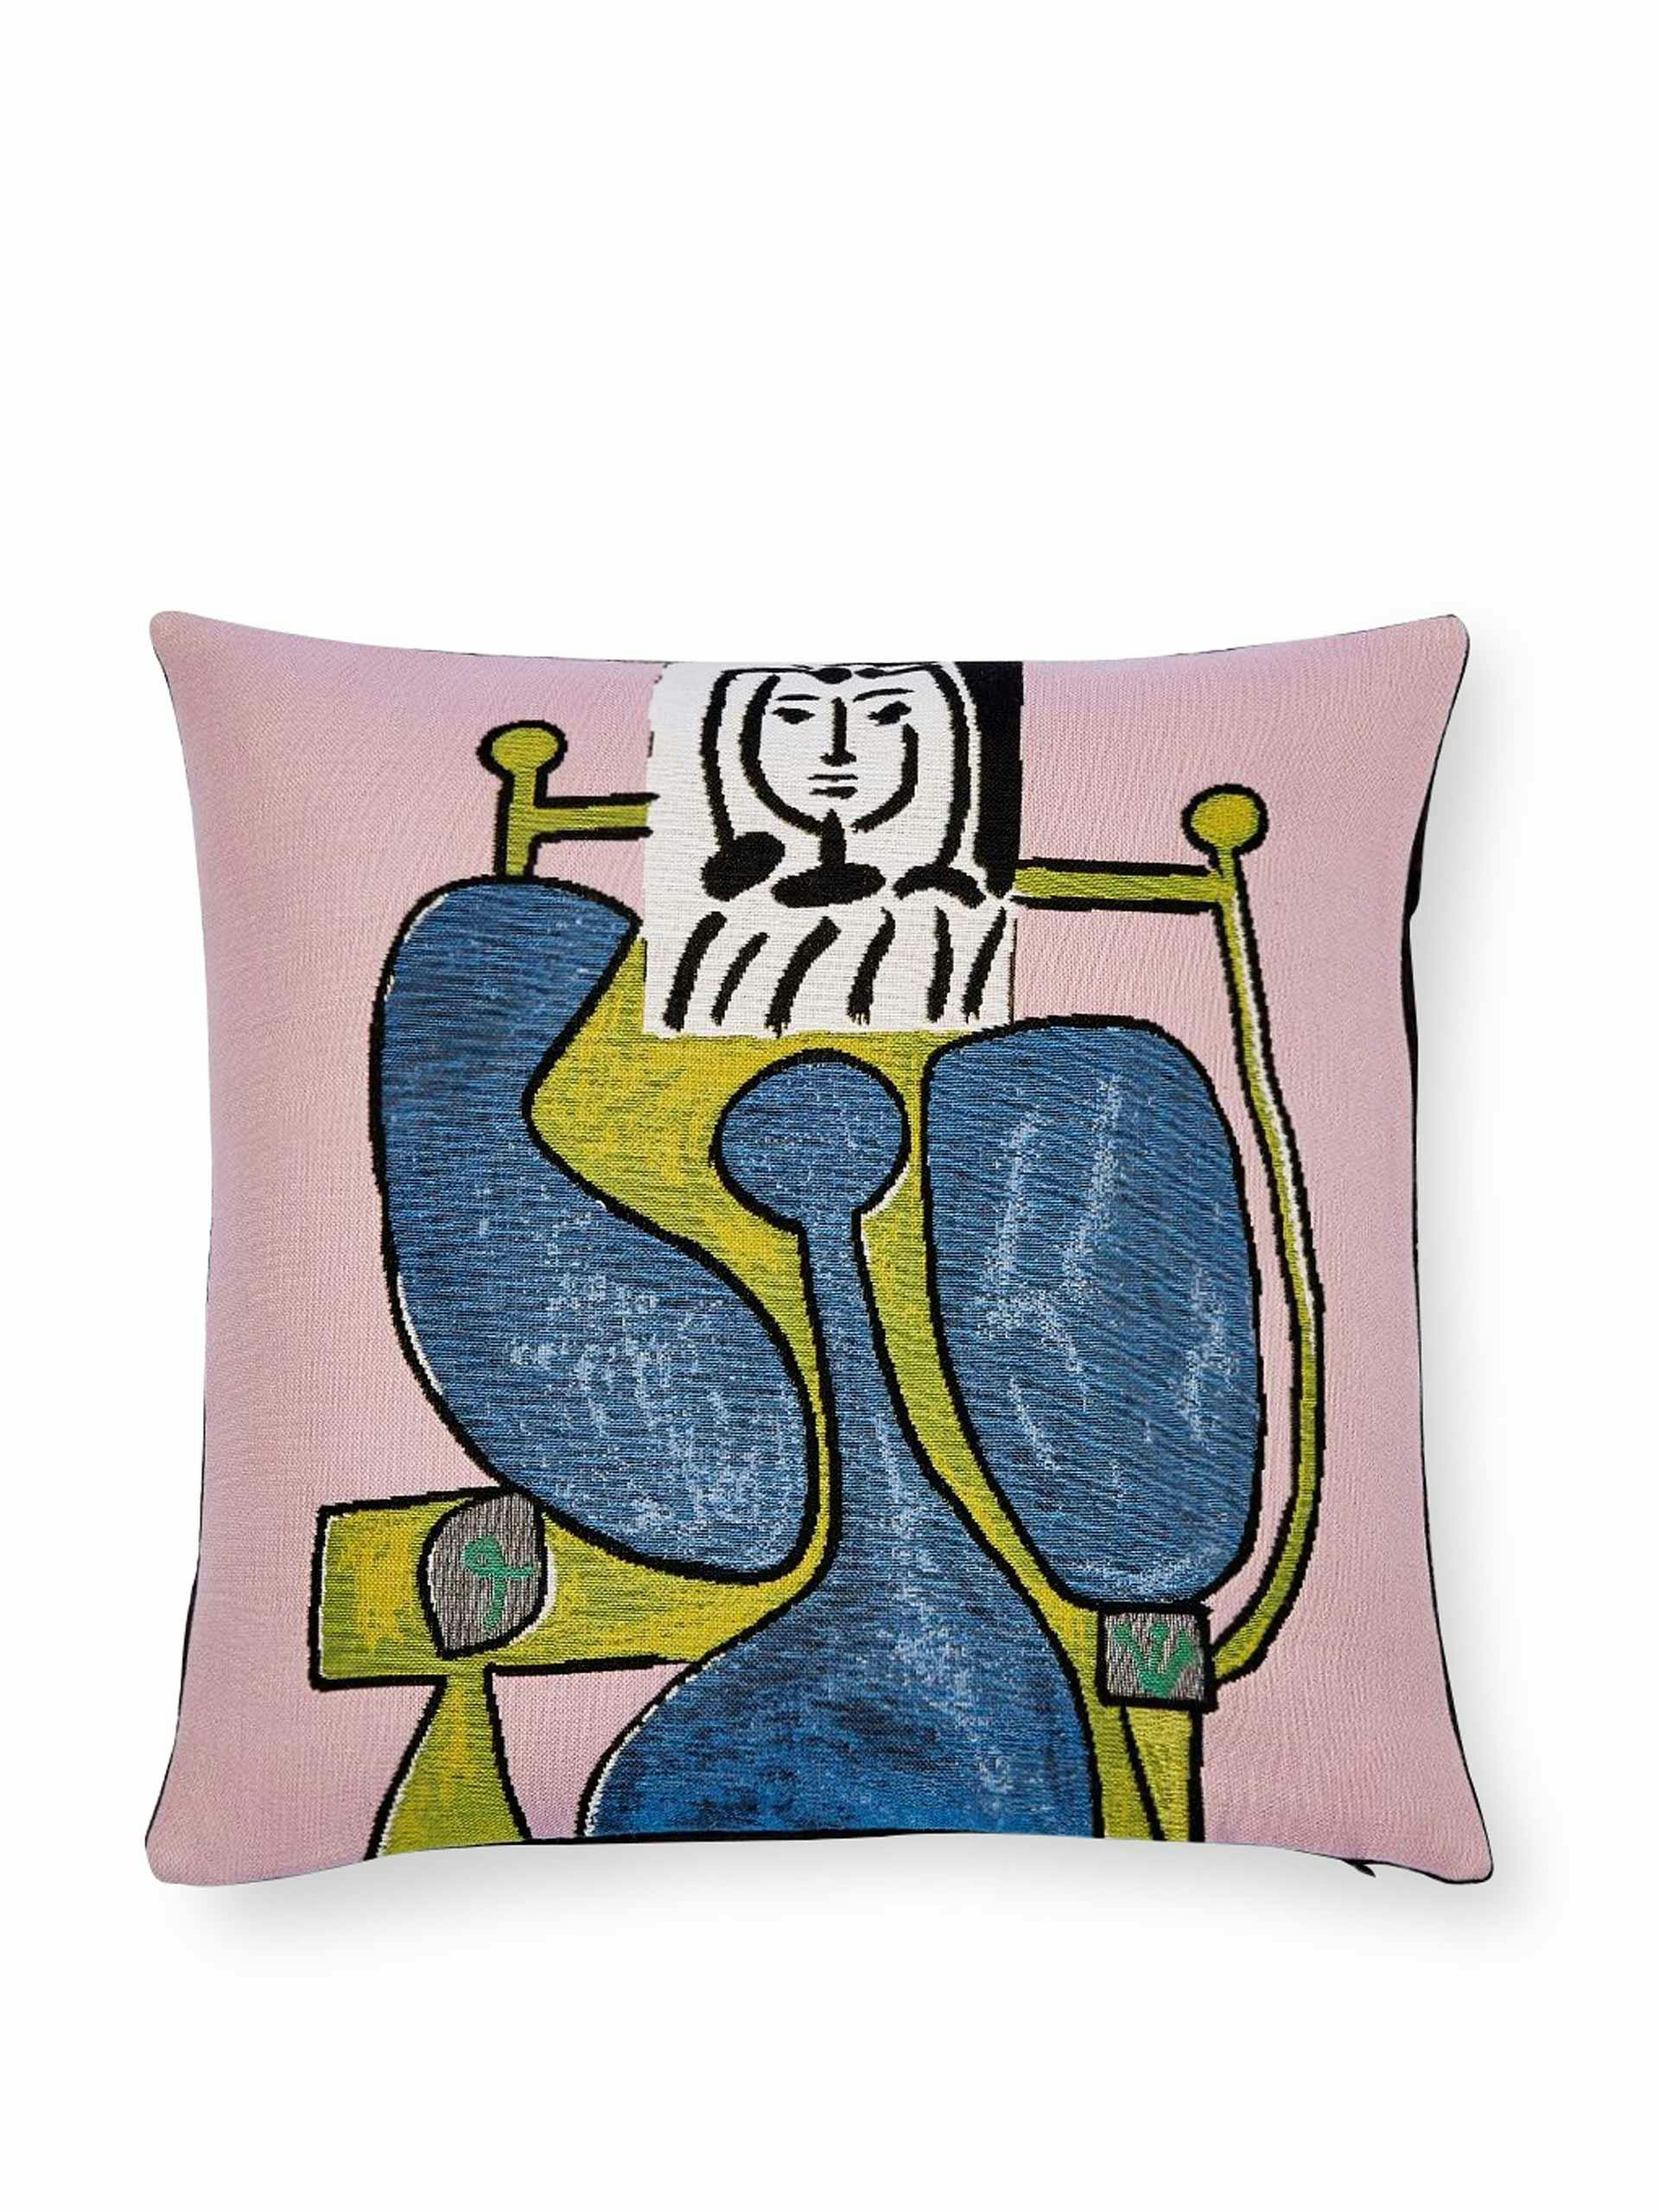 "Woman Sitting In A Dress" Picasso-print cushion